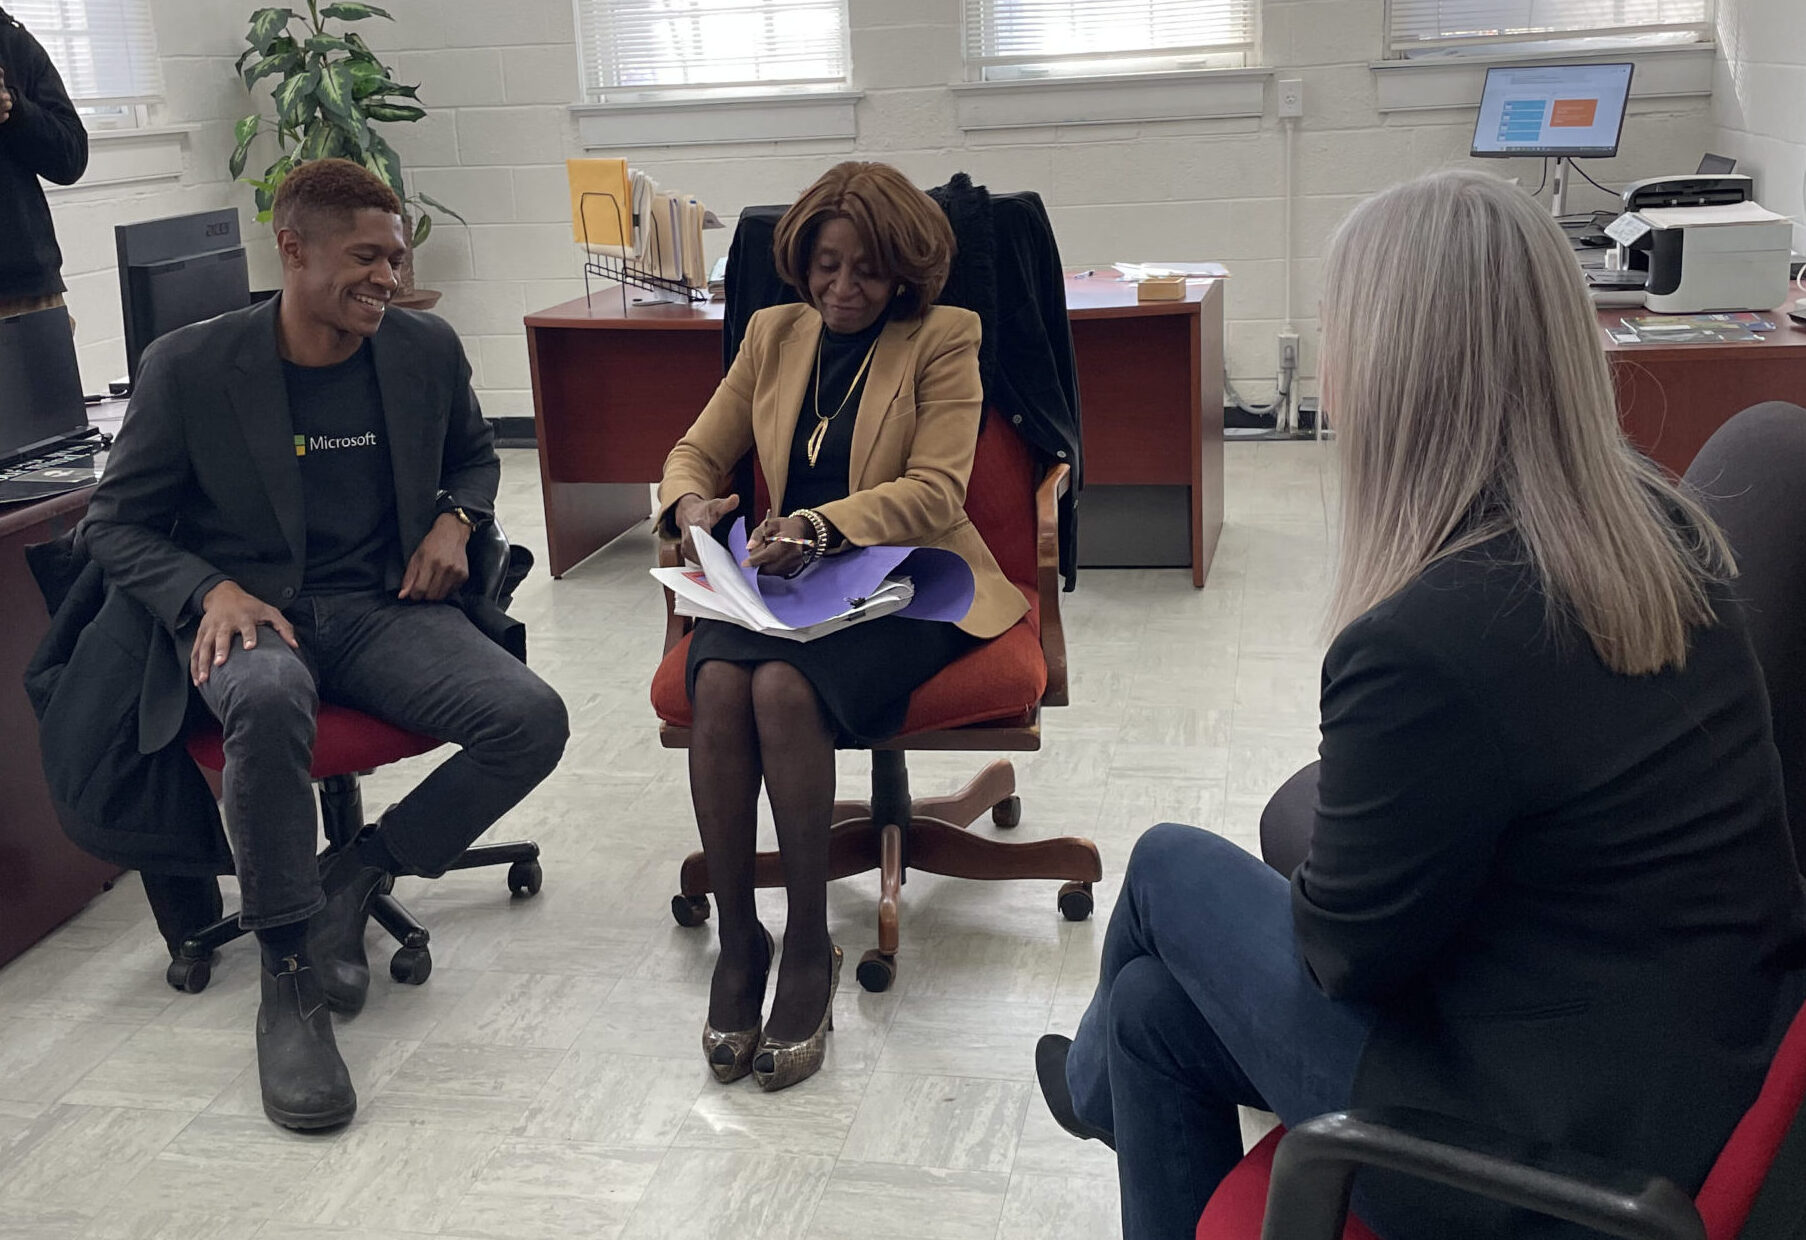 Executive Director of OMITT Innovative Solutions, Rose-Jones Edwards, reflects on technology transformation OMITT has undergone with Apparo, showing JJ the Maturity Model assessment.